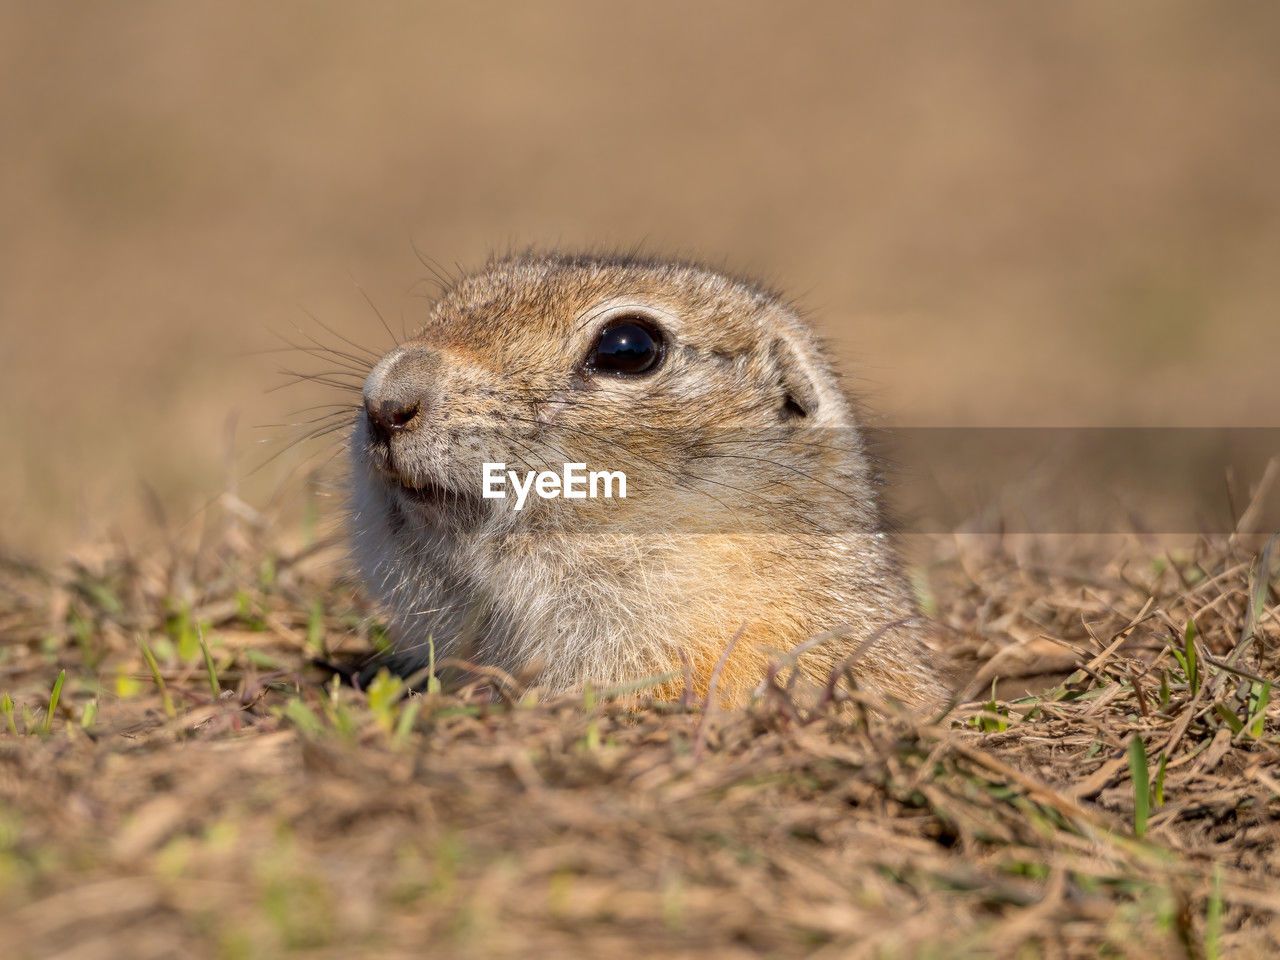 animal, animal themes, animal wildlife, one animal, prairie dog, wildlife, mammal, whiskers, squirrel, no people, rodent, portrait, nature, selective focus, close-up, grass, prairie, outdoors, day, plant, looking at camera, land, cute, eating